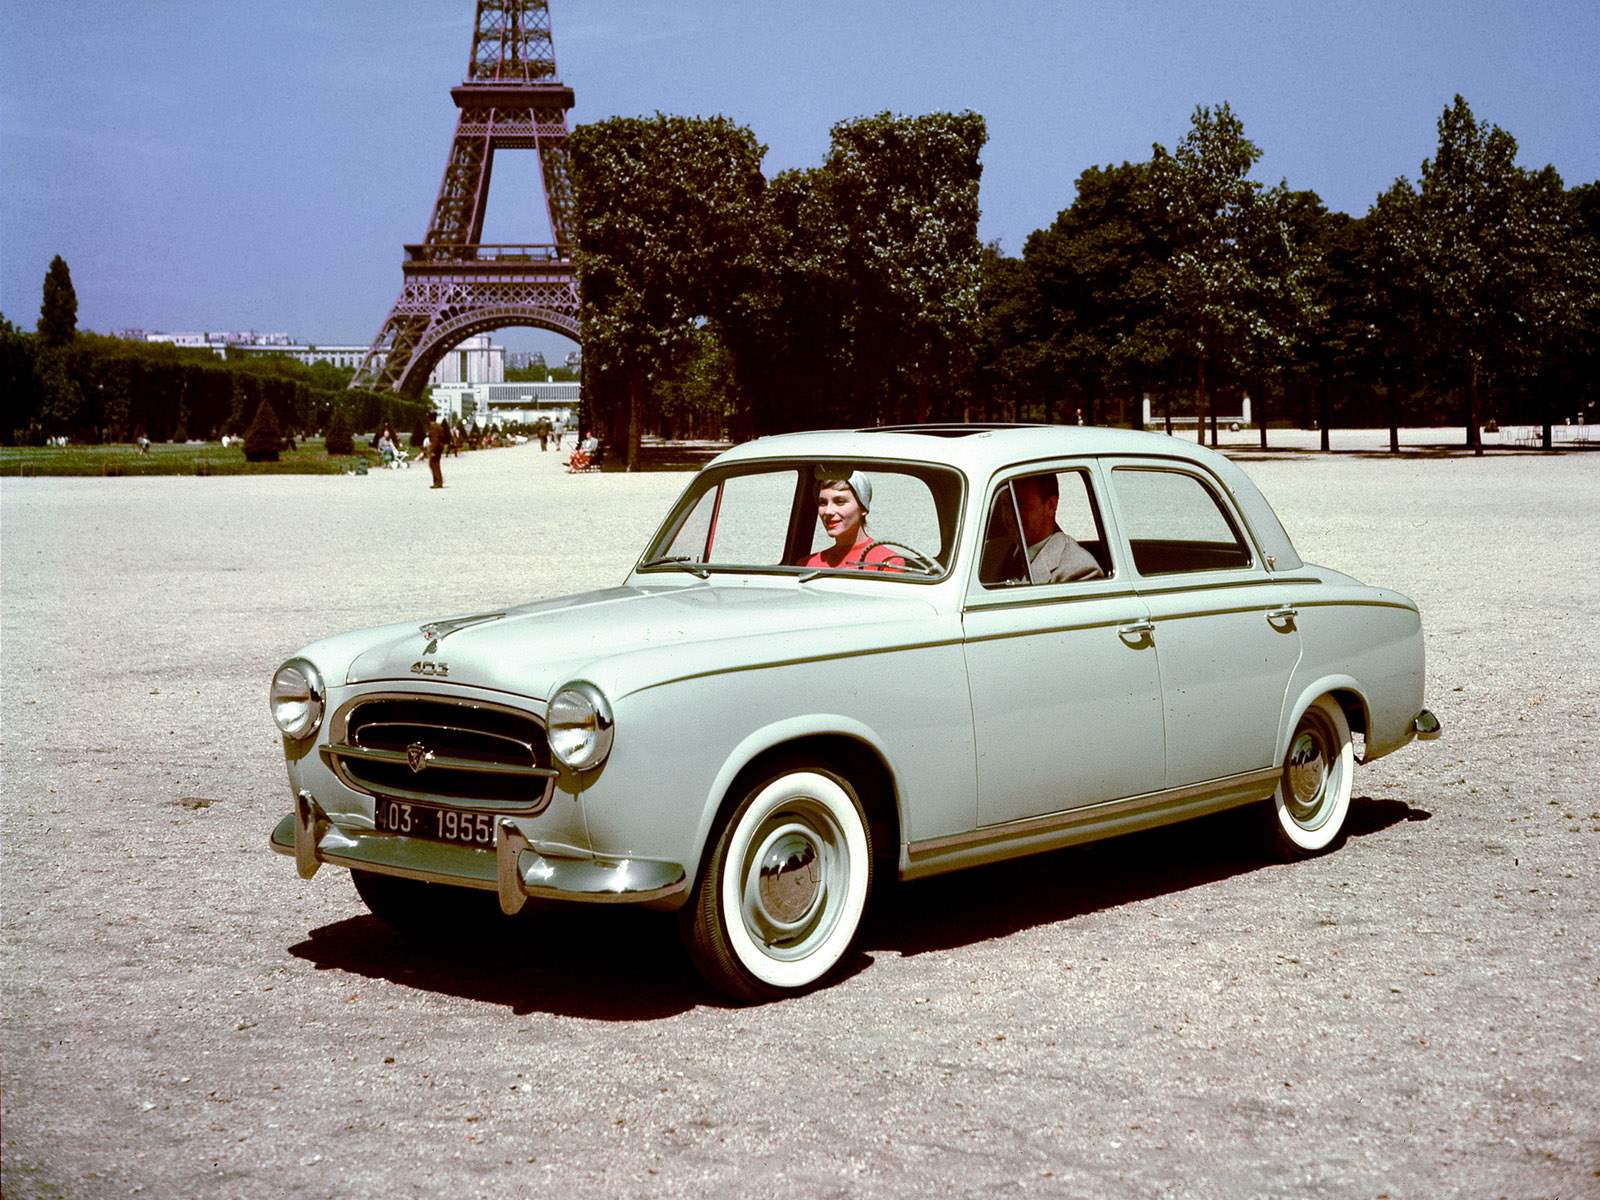 PEUGEOT 403 release in 1955. The design of this car has developed Batista Farina, the future head of the firm Pininfarina body